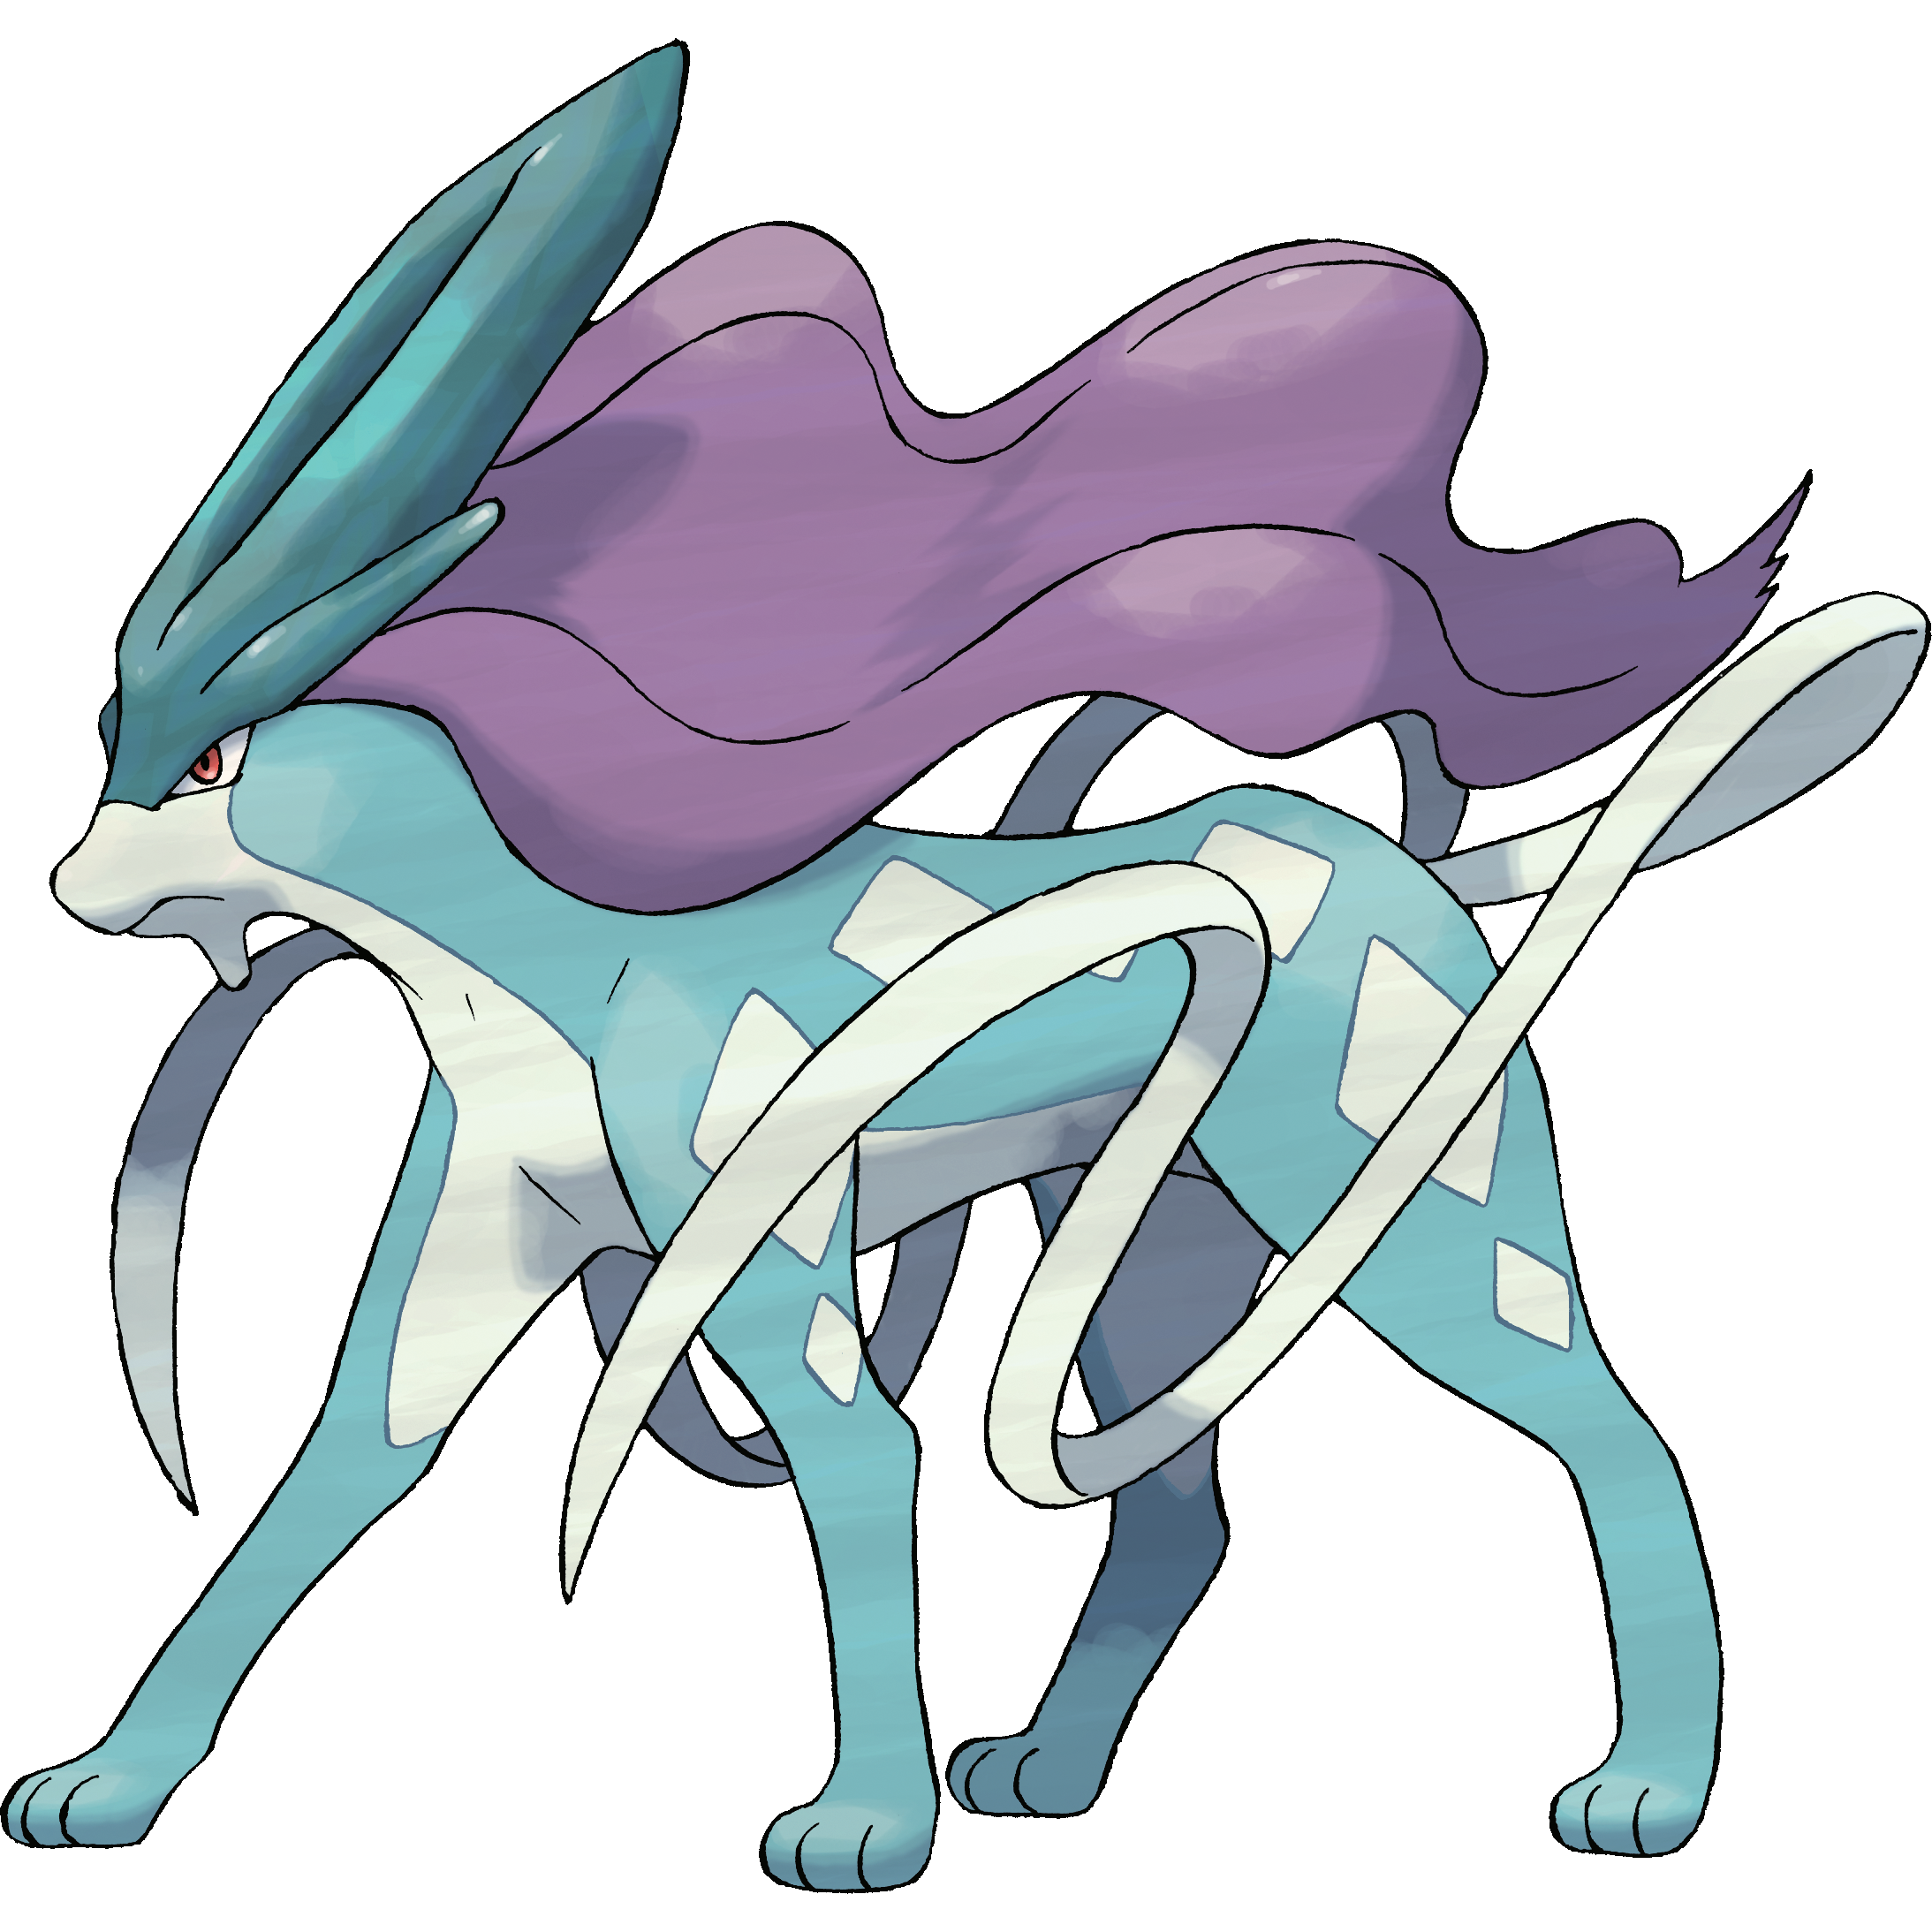 Get a Free Level 100 Raikou or Entei from Target Until April 29